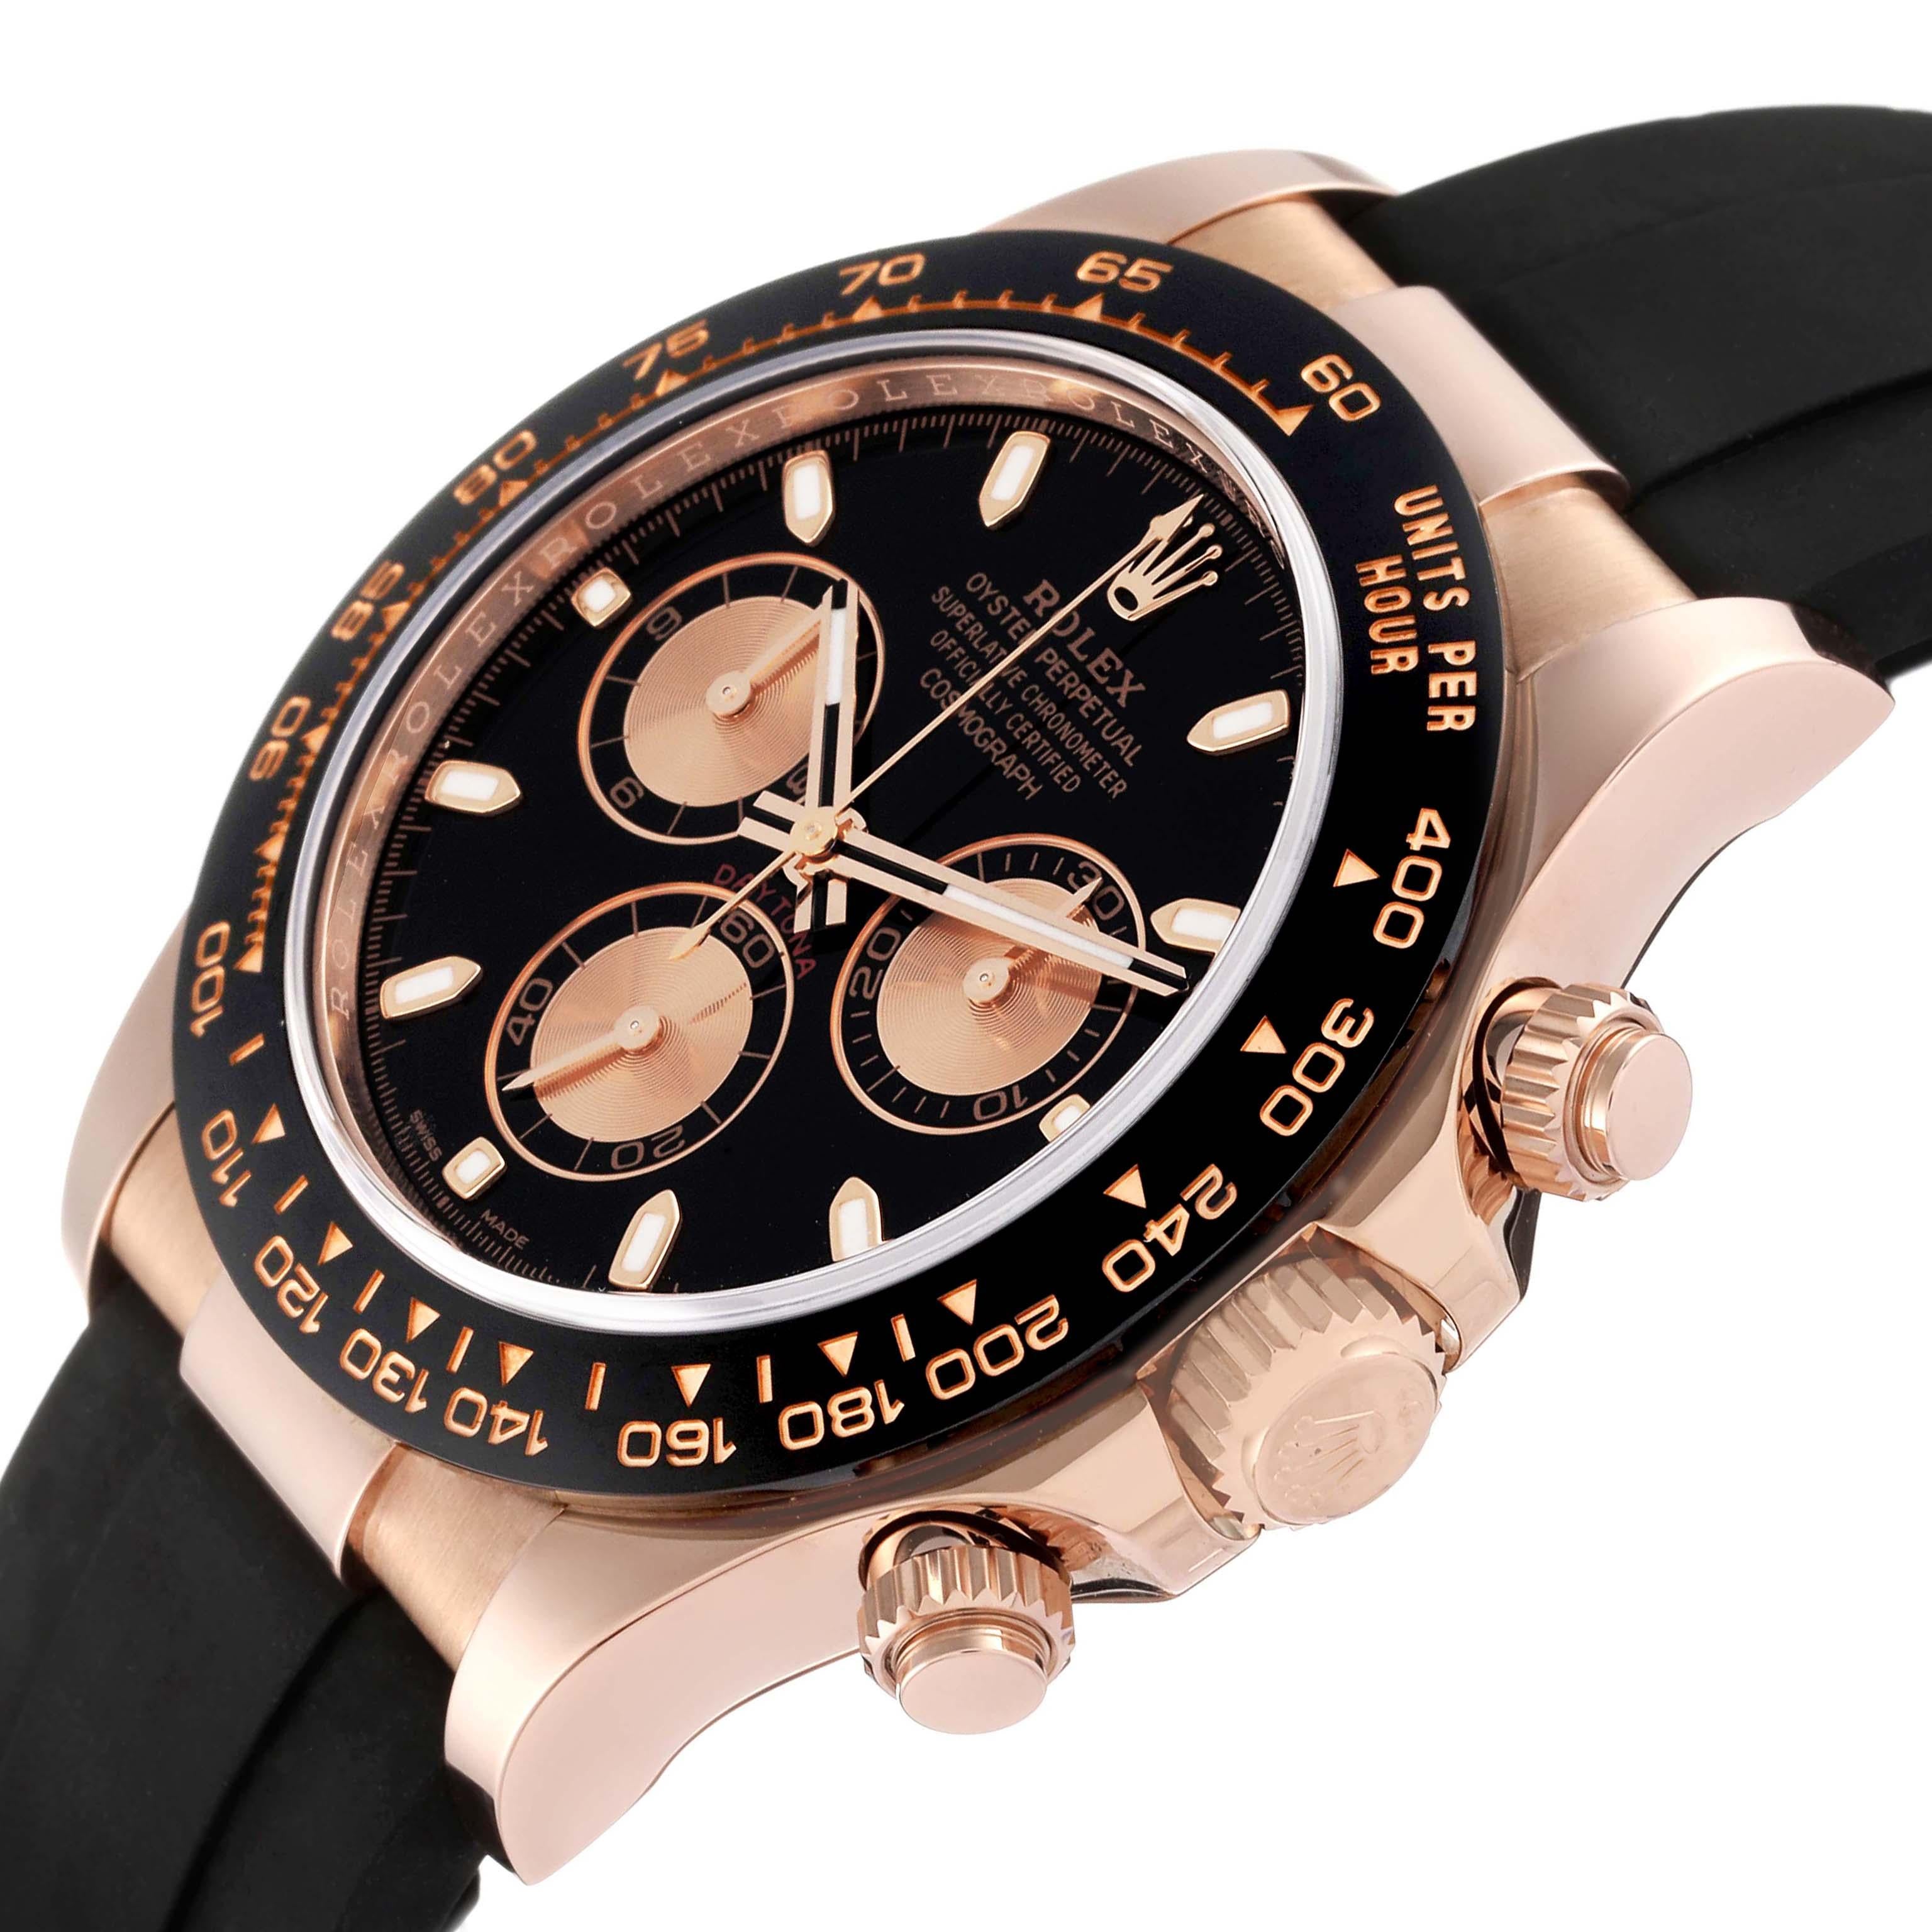 Rolex Cosmograph Daytona Rose Gold Mens Watch 116515 Box Card For Sale 1